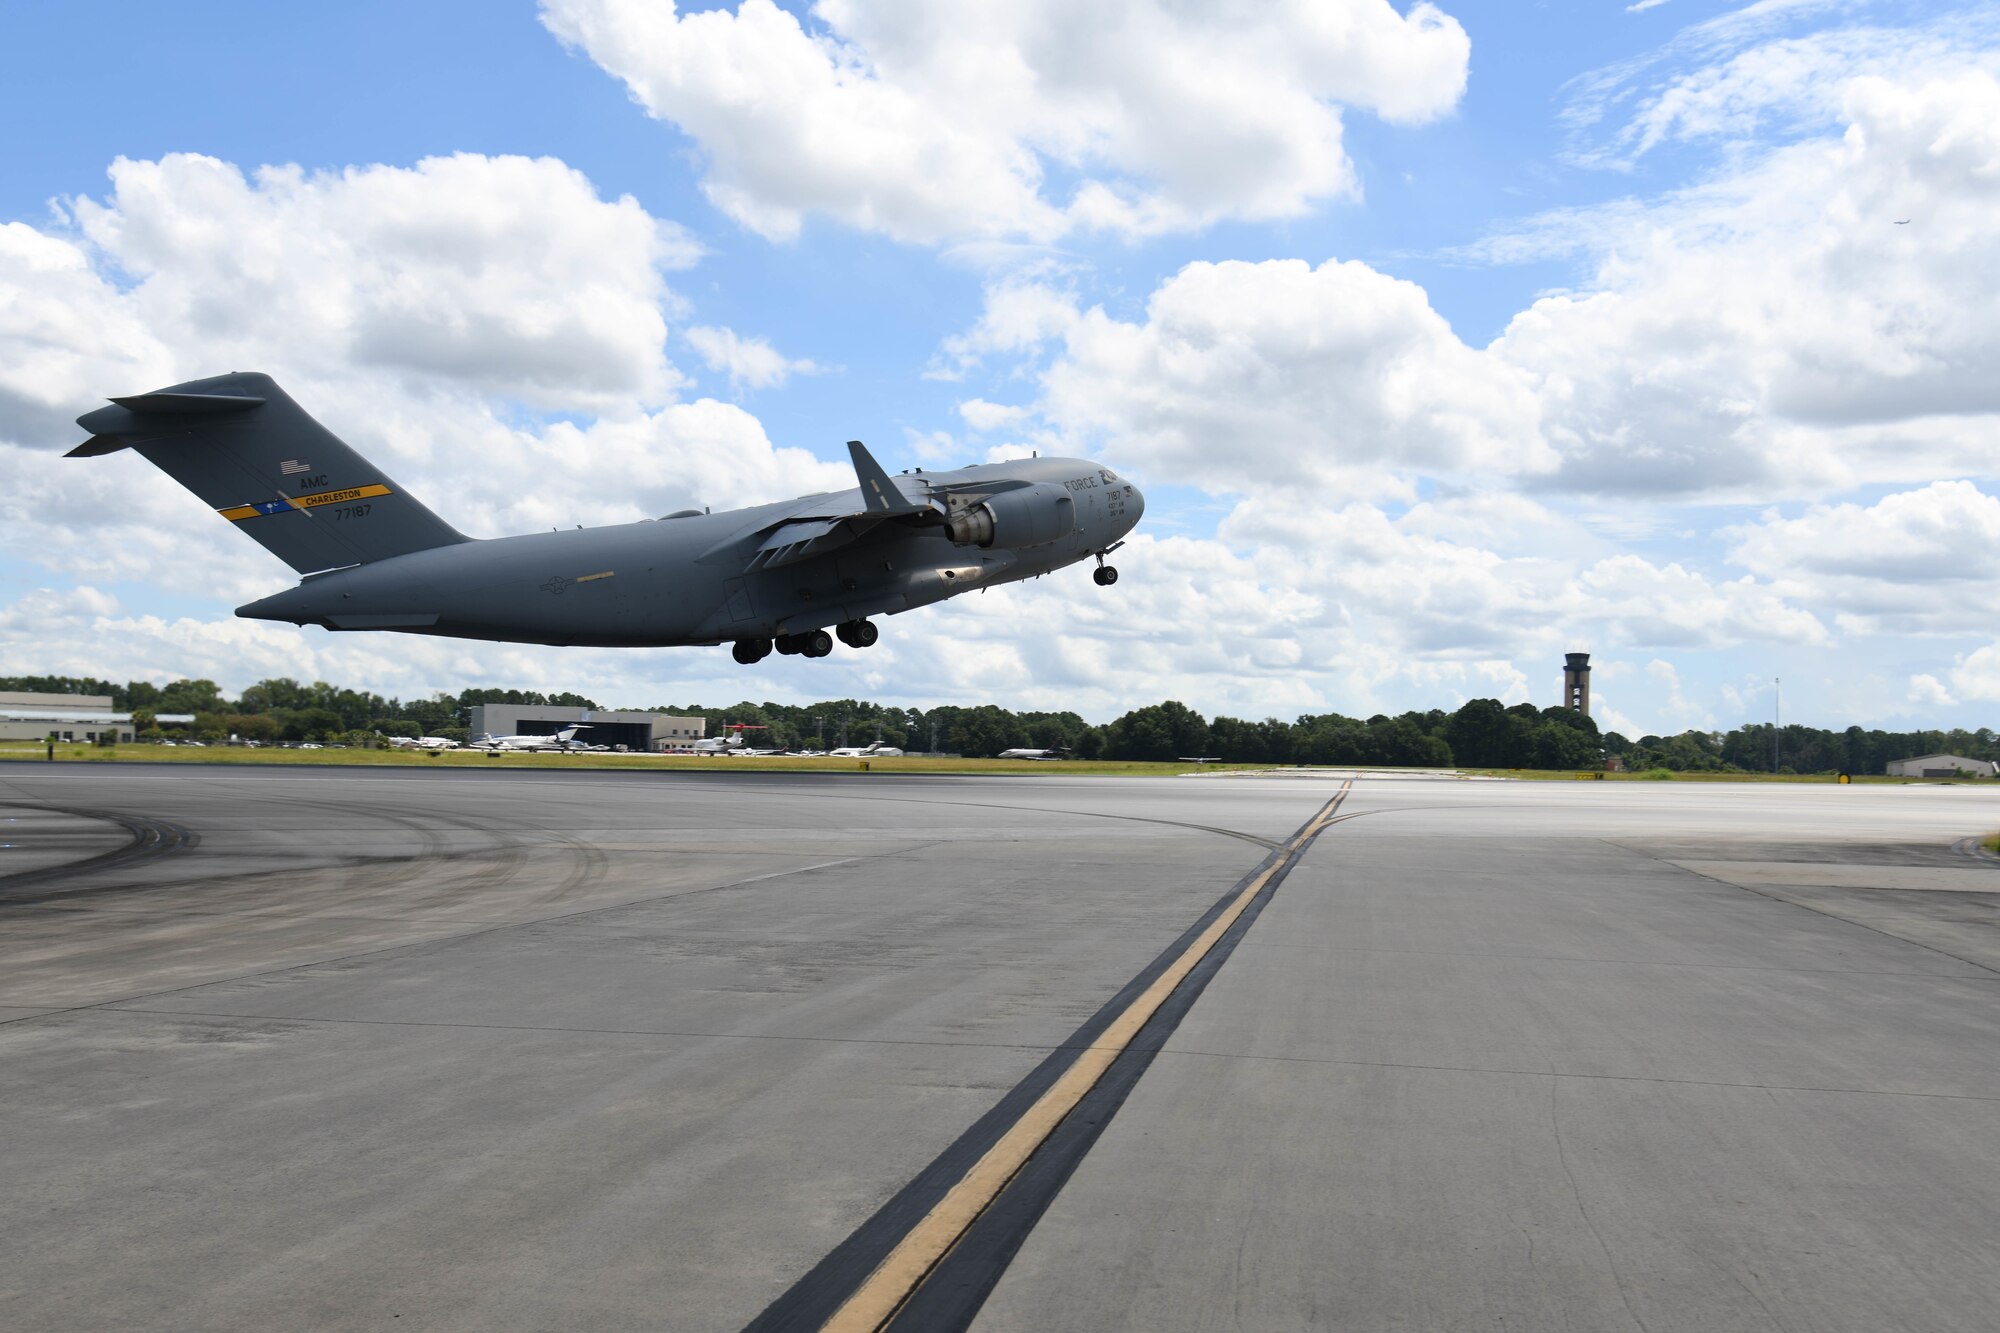 A U.S. Air Force C-17 Globemaster III departs Joint Base Charleston, S.C. carrying U.S. Army Soldiers assigned to the 82nd Airborne Division.